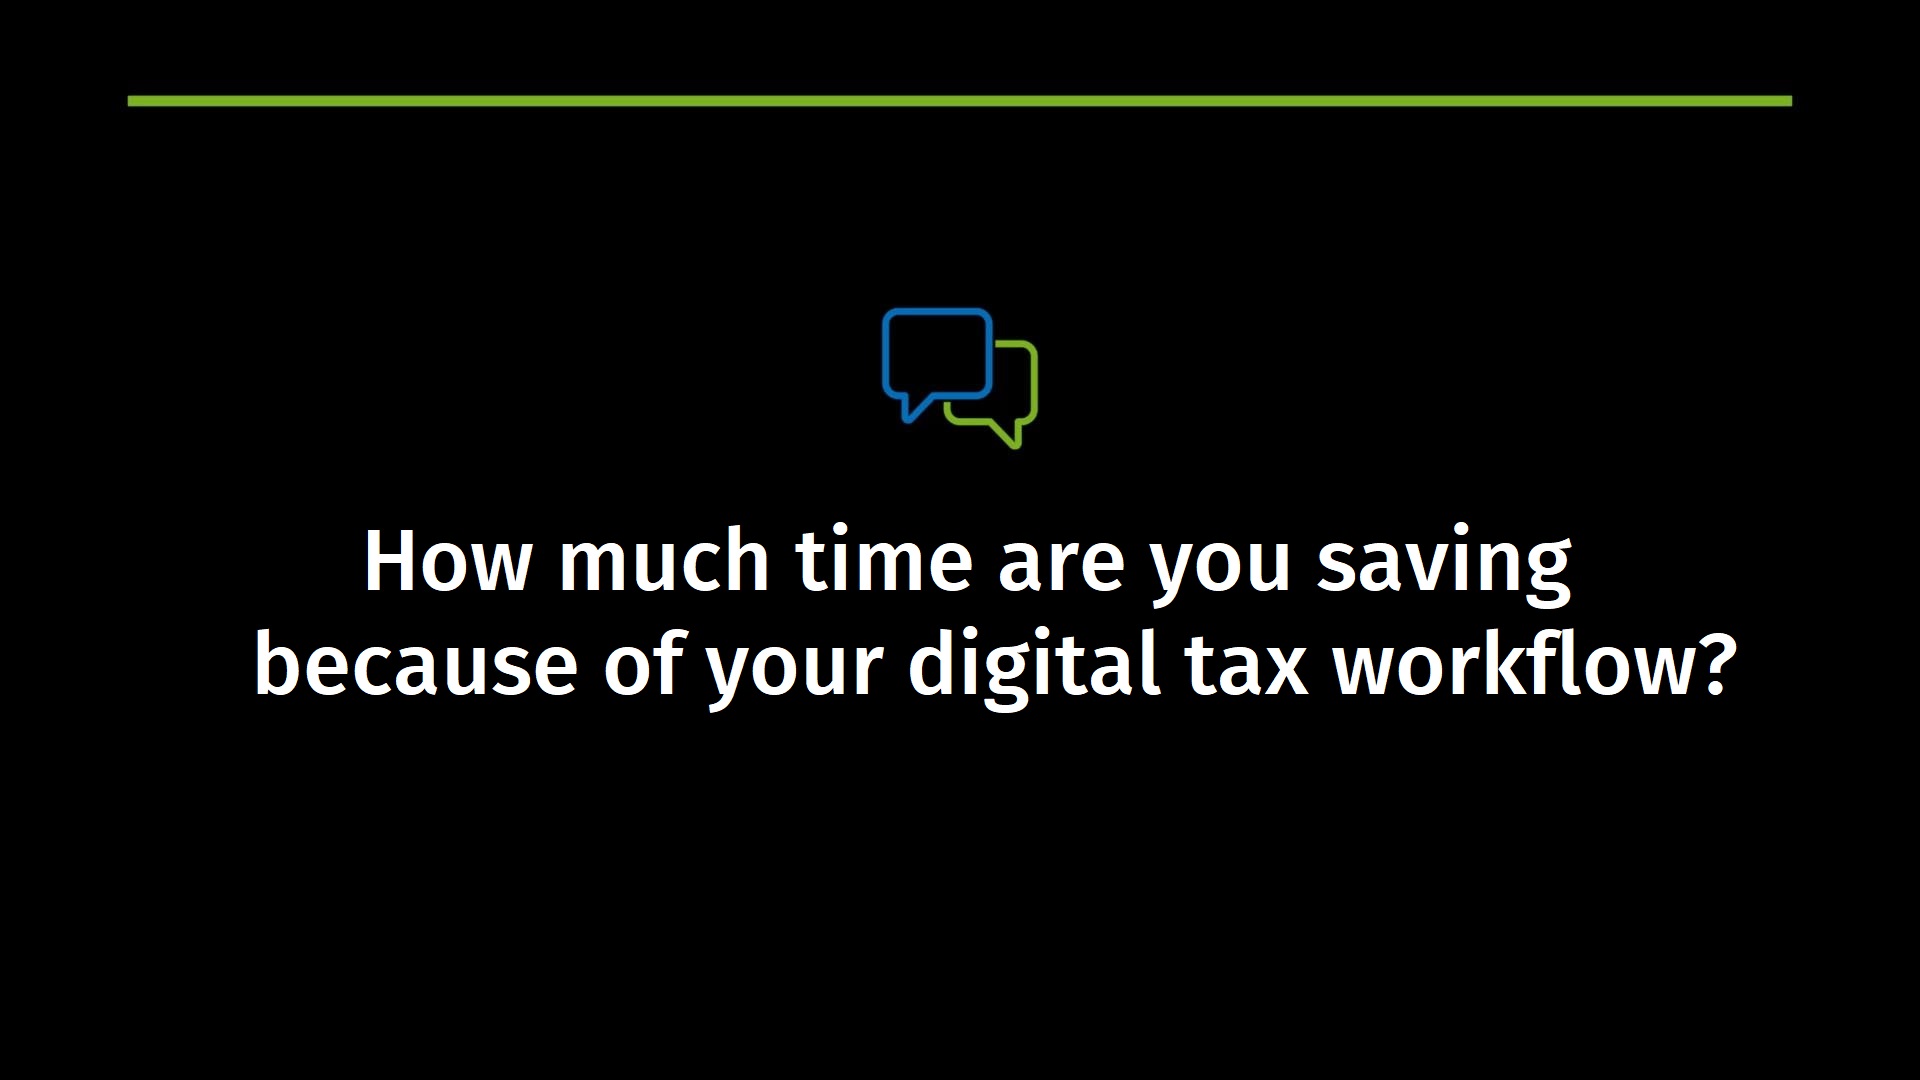 How much time are you saving because of your digital tax workflow?